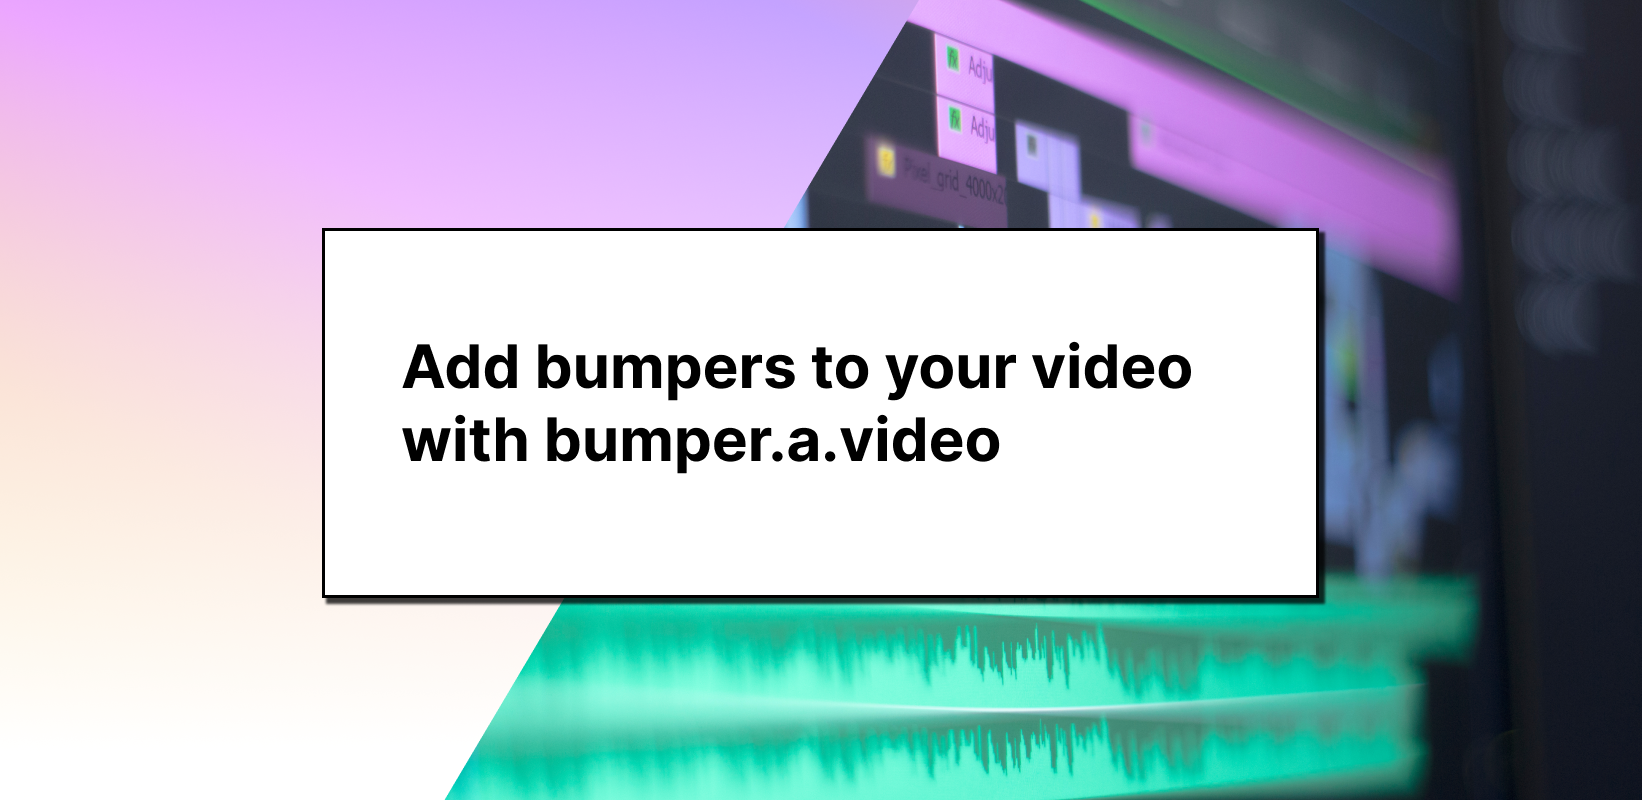 Add bumpers to your video with bumper.a.video